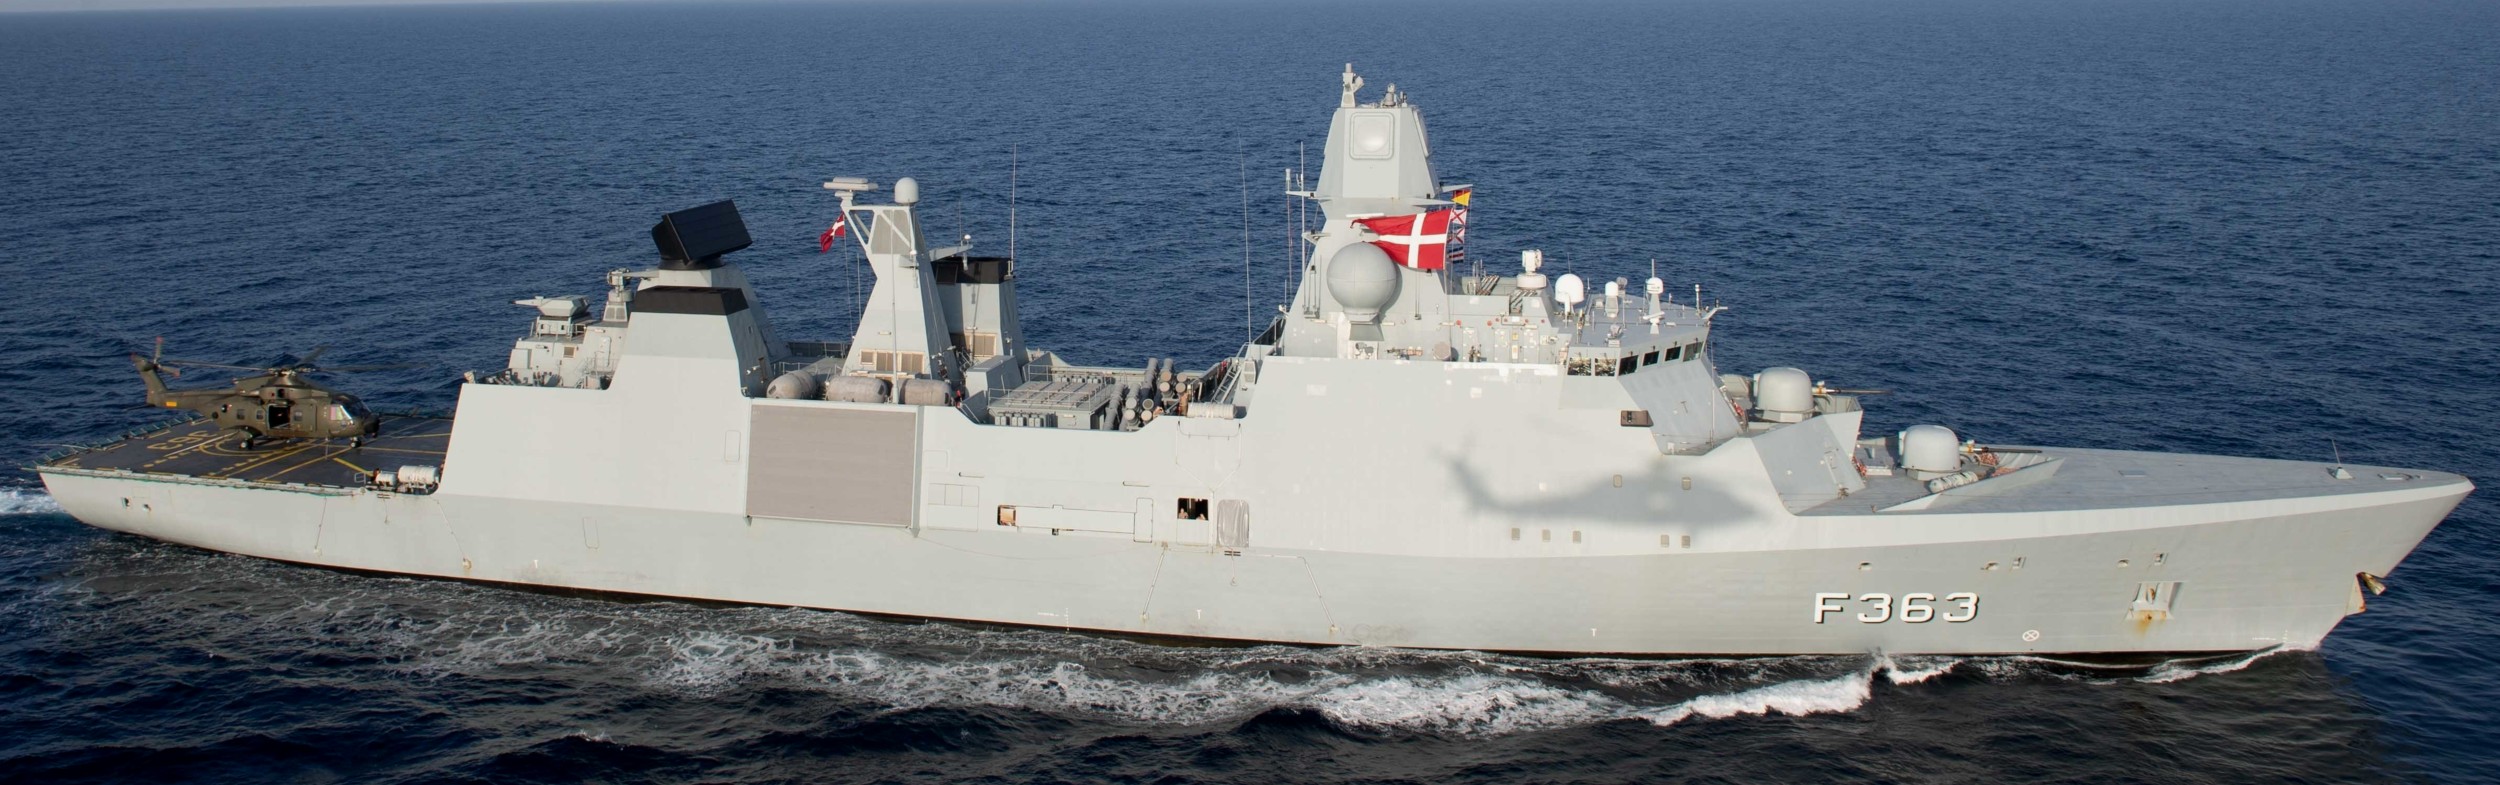 f-363 hdms niels juel iver huitfeldt class guided missile frigate ffg royal danish navy 16